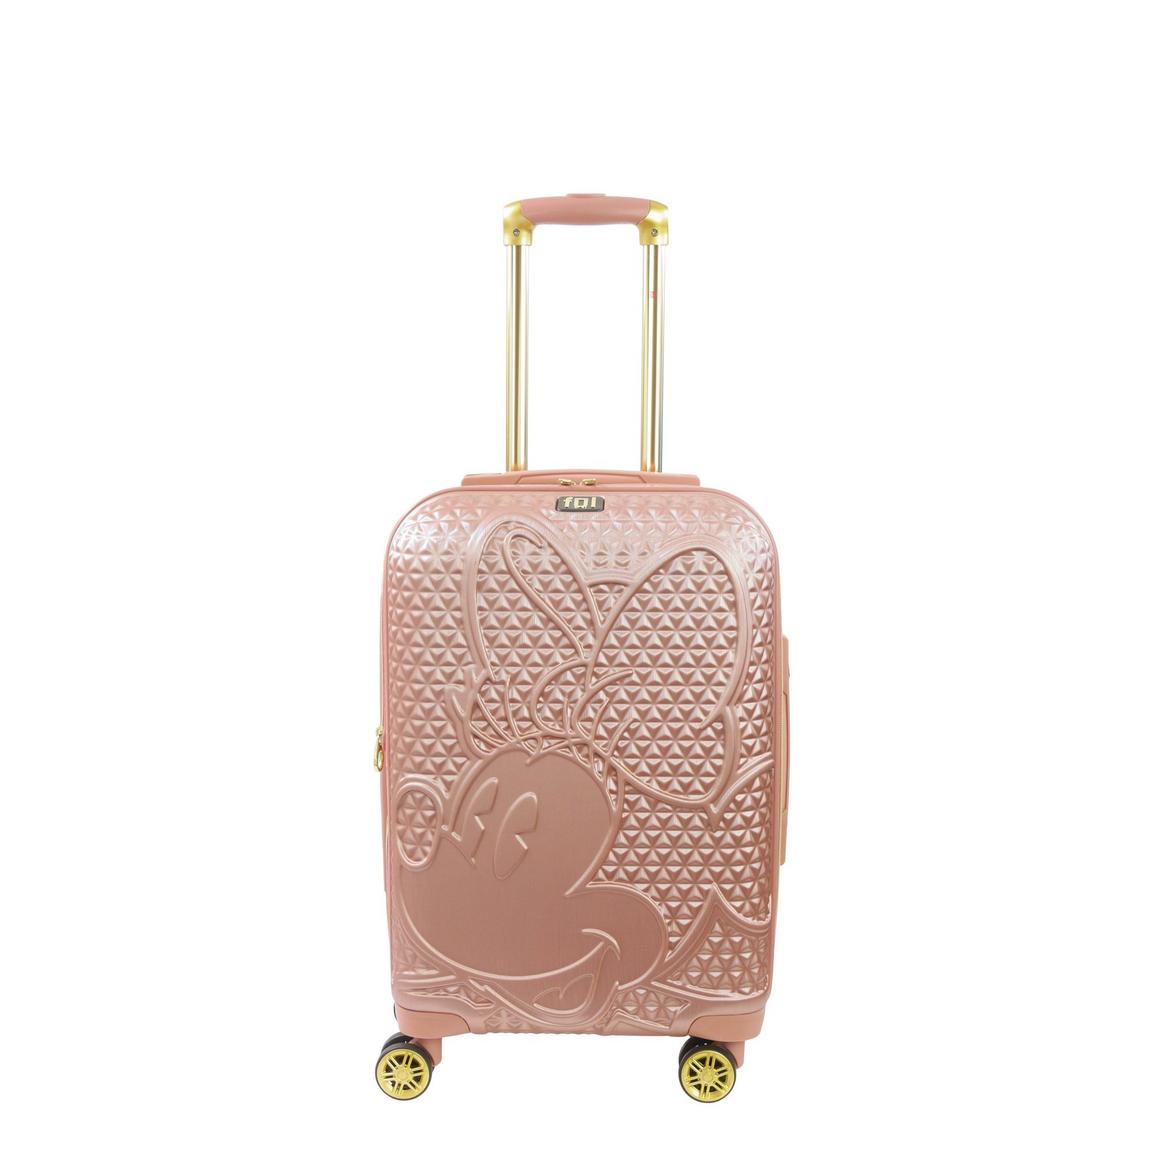 Disney Ful Textured Minnie Mouse 22-in Hard-Sided Carry-On Luggage - Rose Gold, Concept One